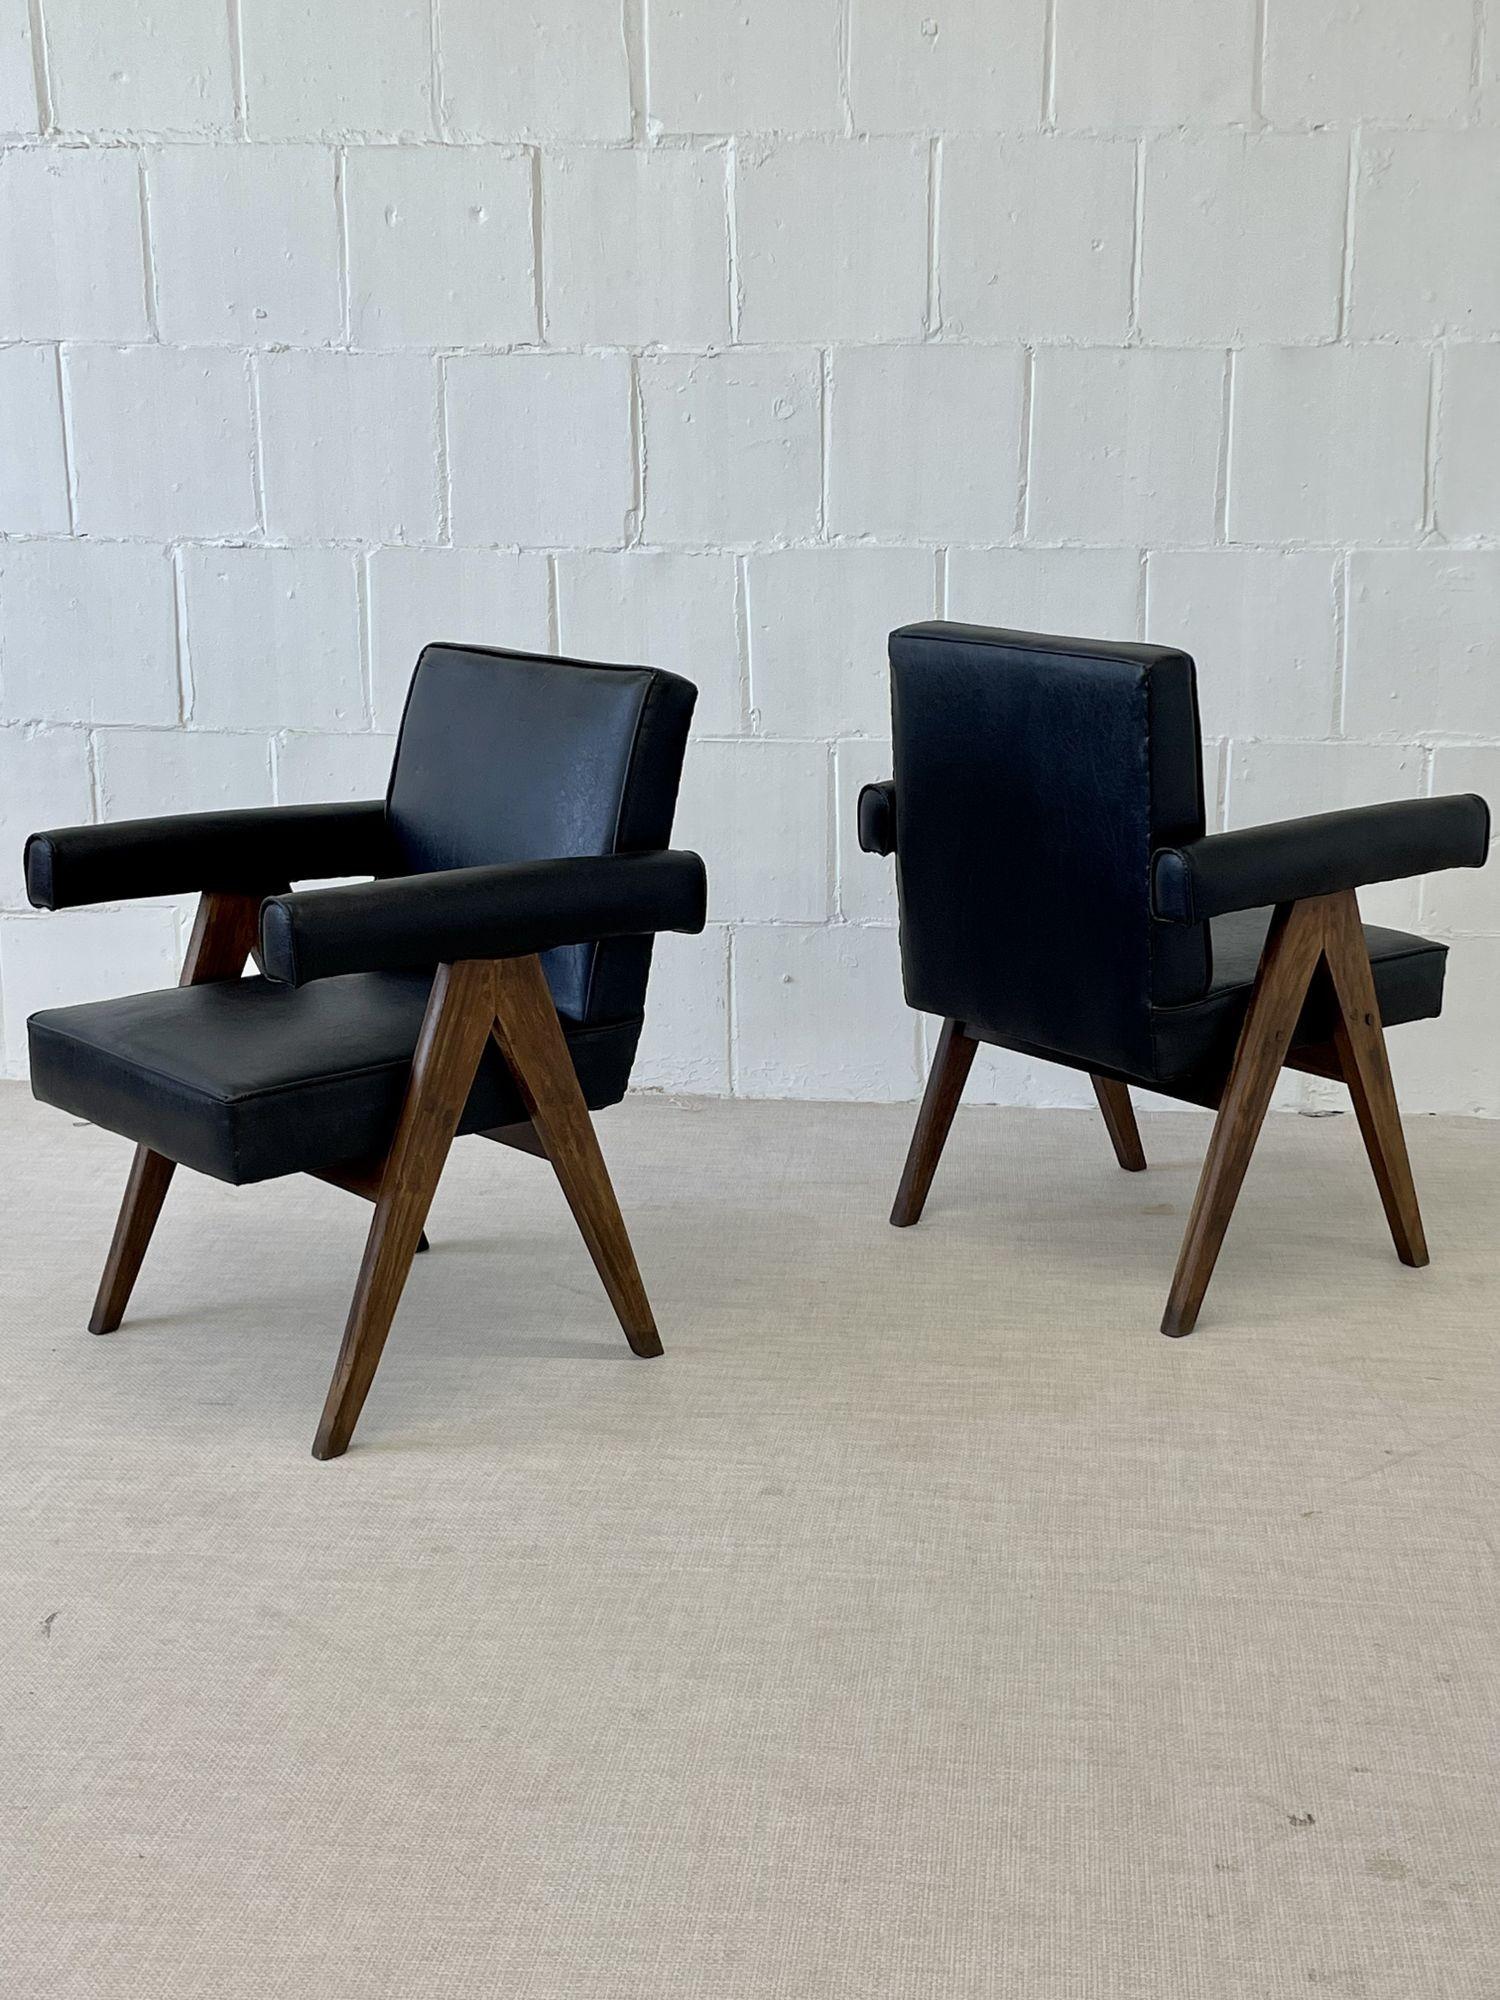 Pierre Jeanneret 'Committee' Chairs, Model PJ-SI-30-C
 
Pair of armchairs featuring slightly titled armrests and back sitting on a solid teak compass type side leg assembly. 
 
Provenance: High Court in Chandigarh, administrative buildings, Punjab